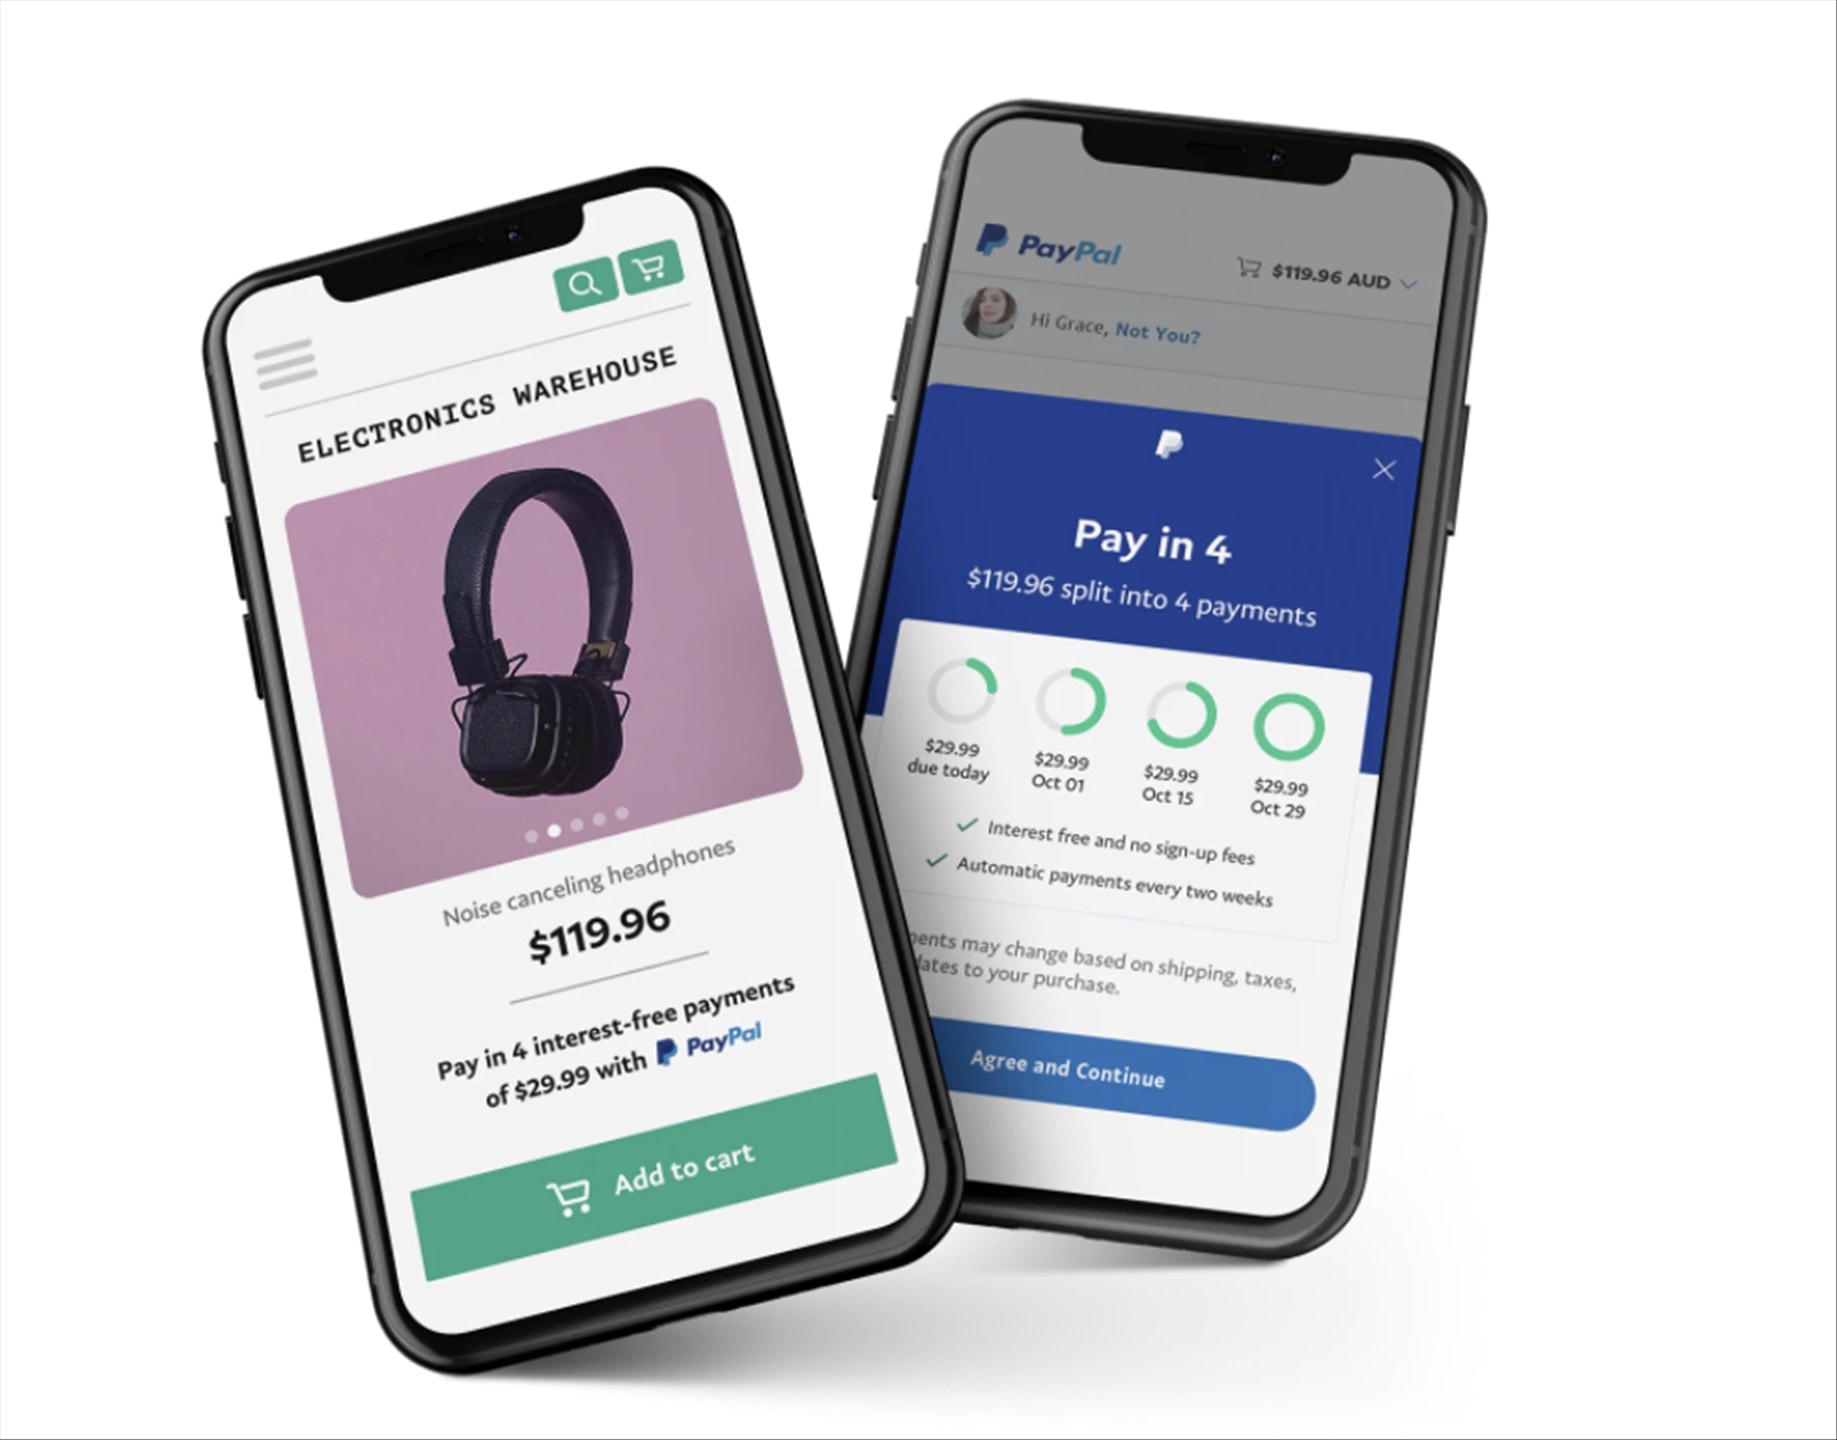 PayPal-Afterpay